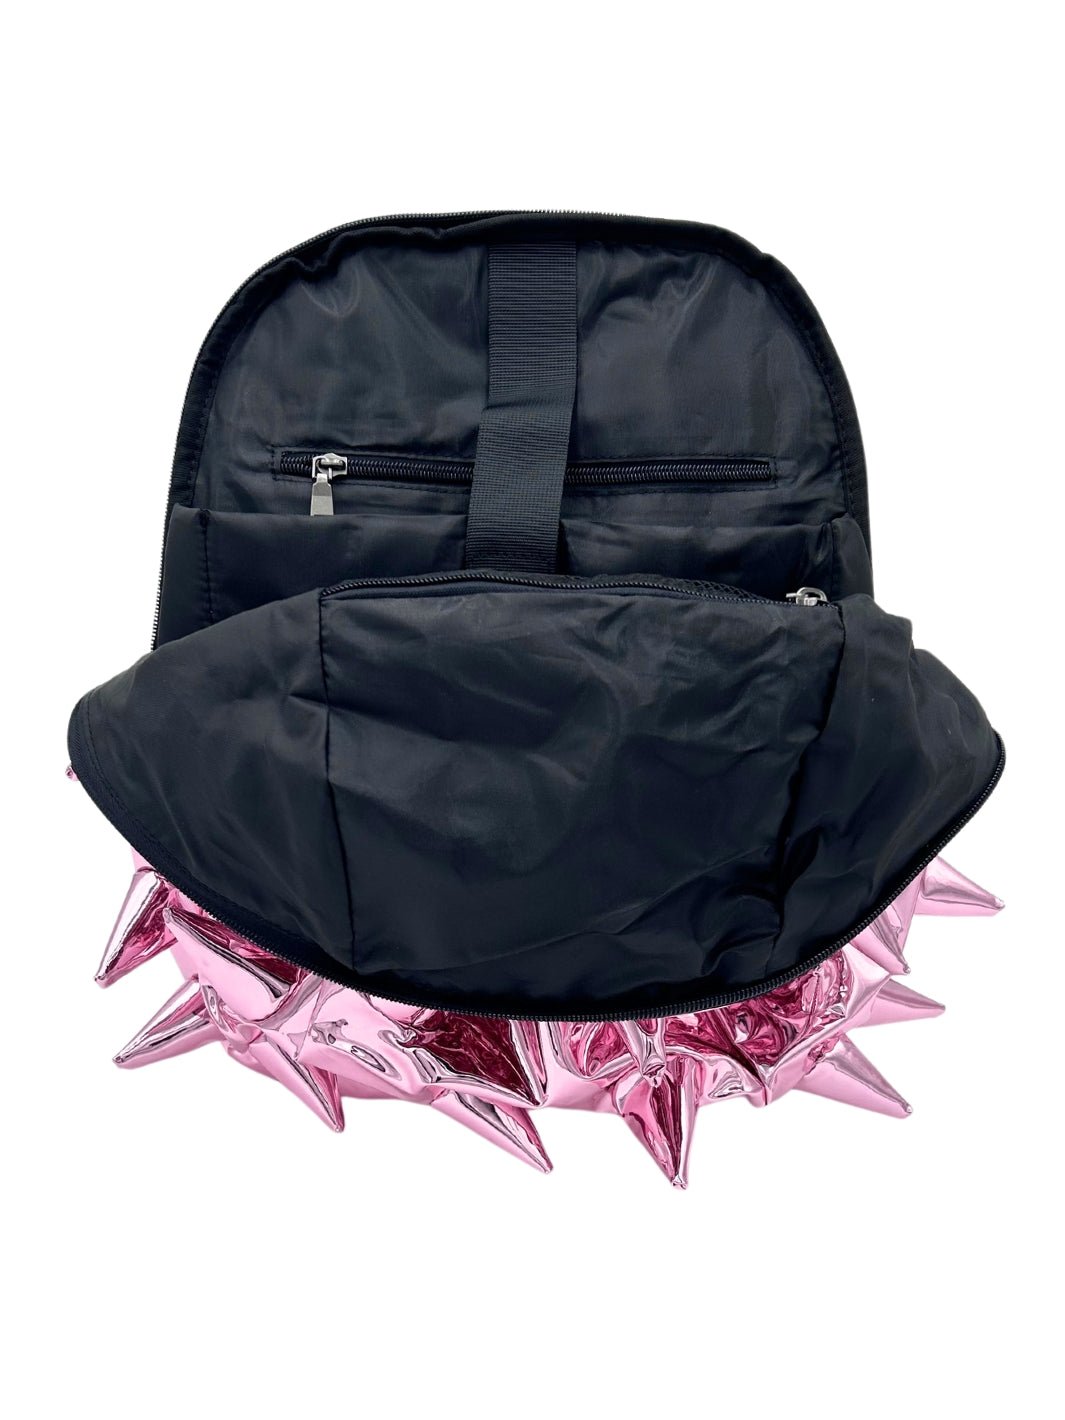 Inside view of metallic pink bookbag with spikes by Madpax